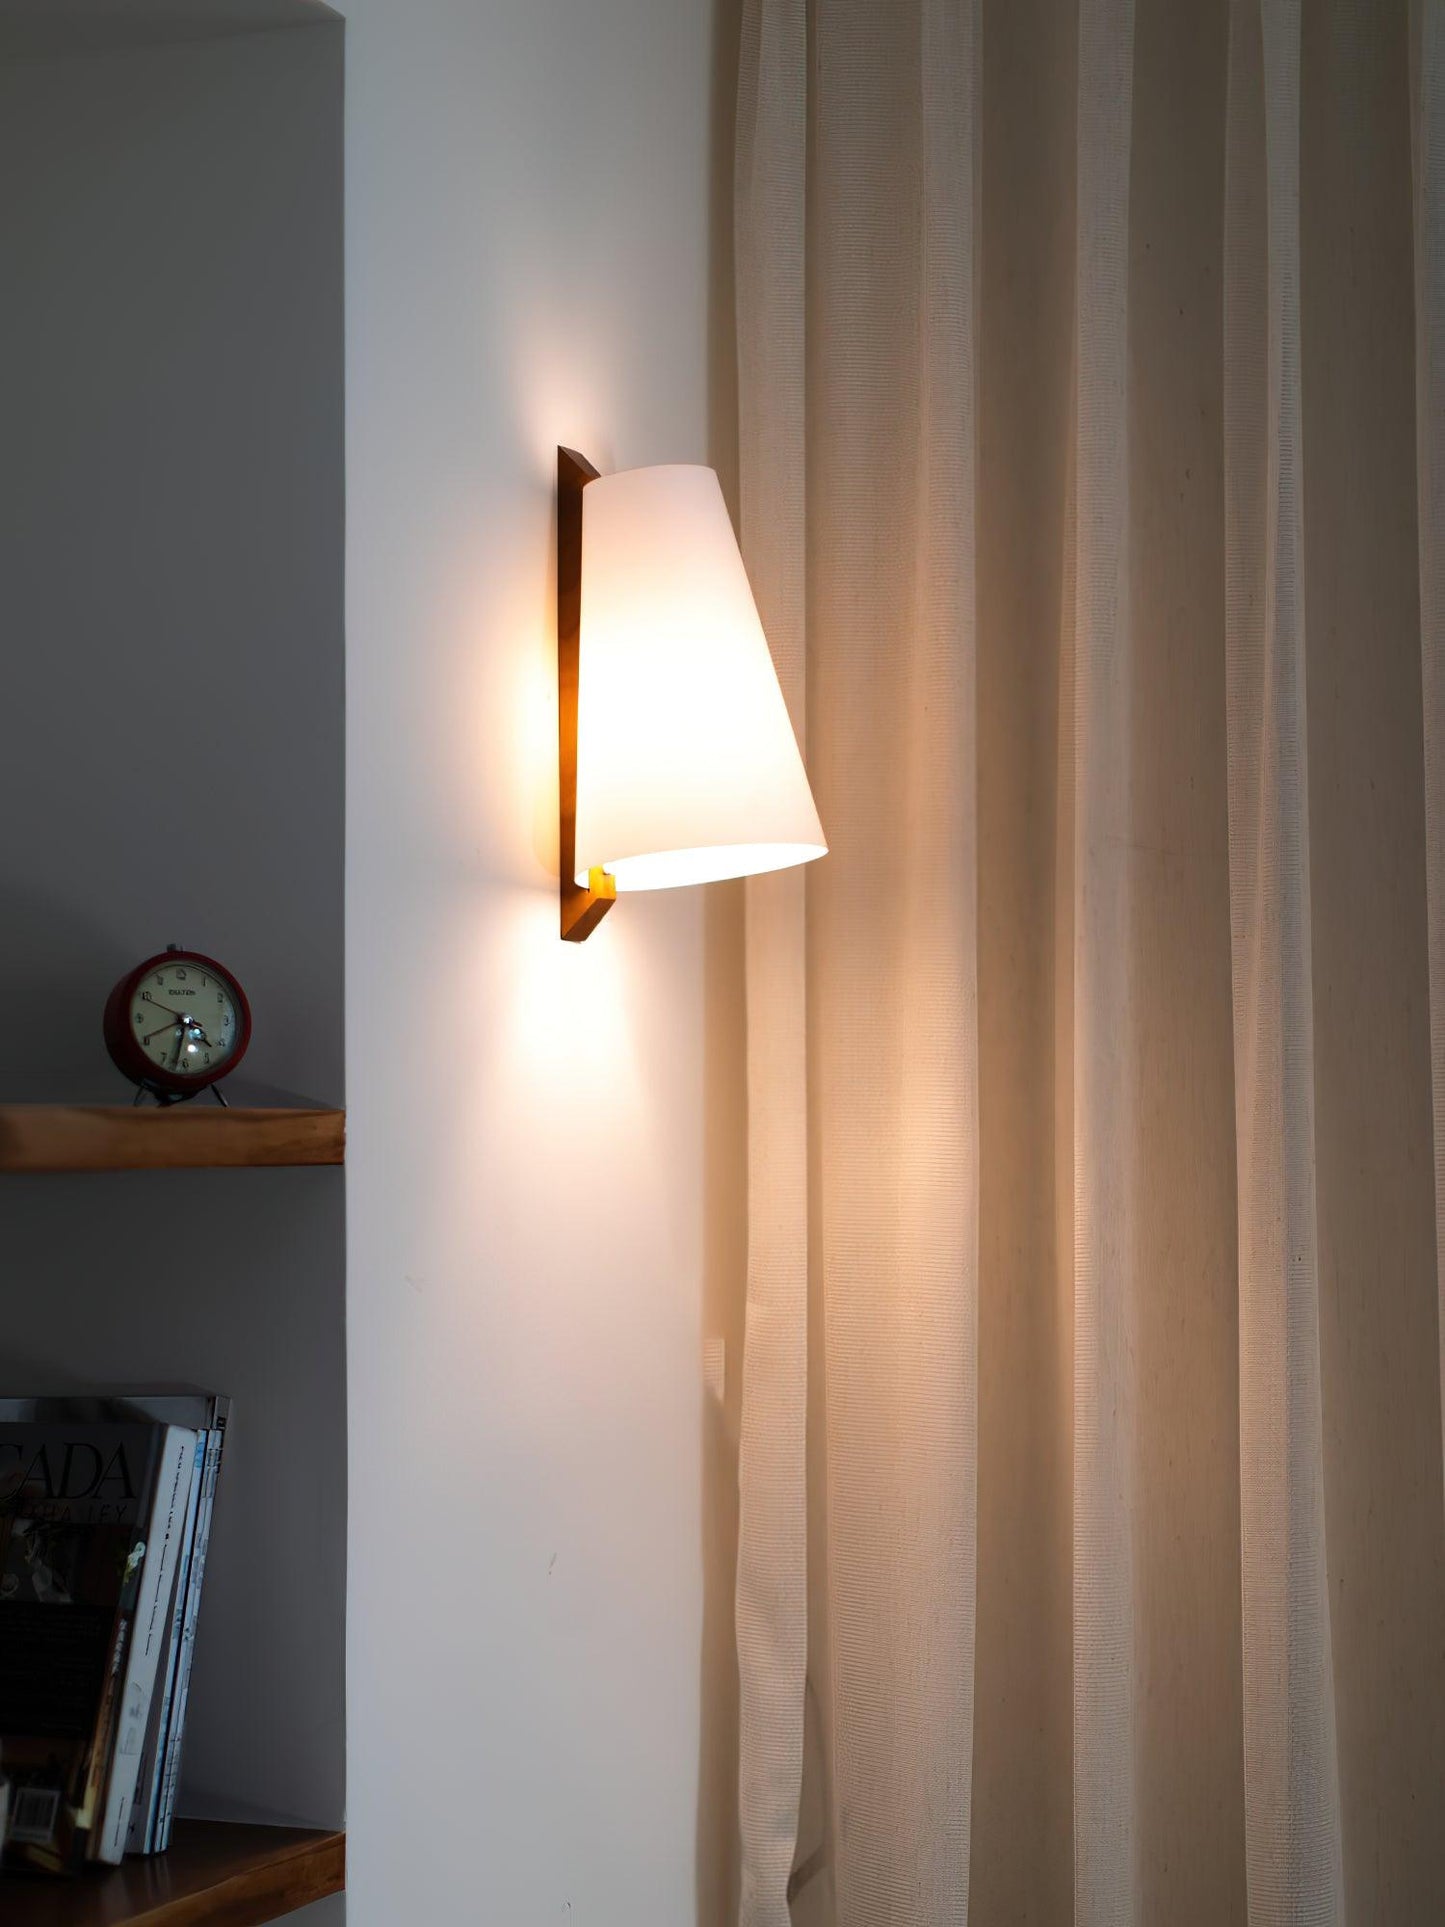 Lupe Wall Lamp